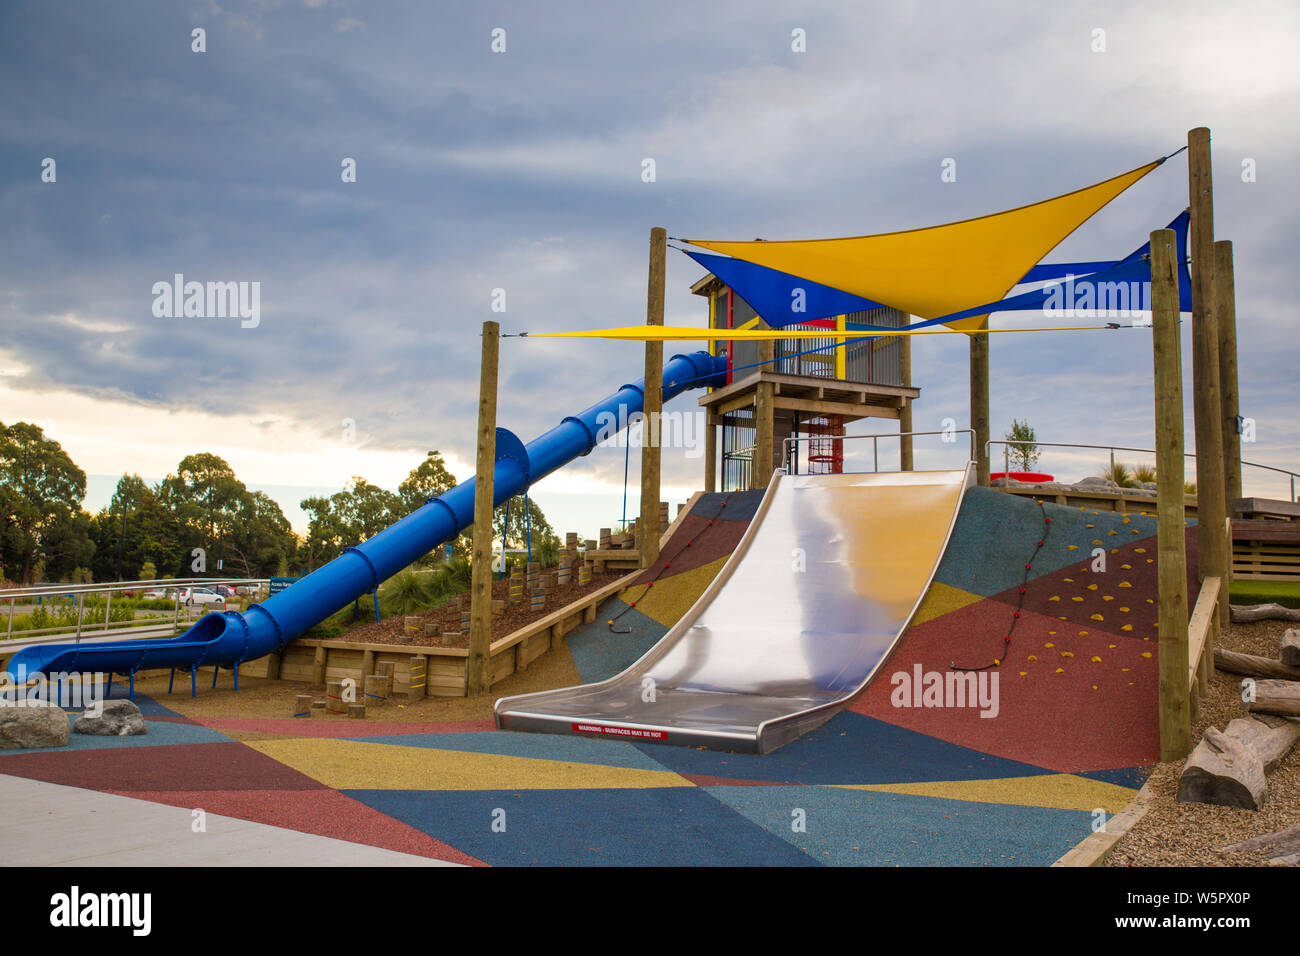 The slide area is covered by sun shade sails in a new children's playground in Rolleston, New Zealand Stock Photo